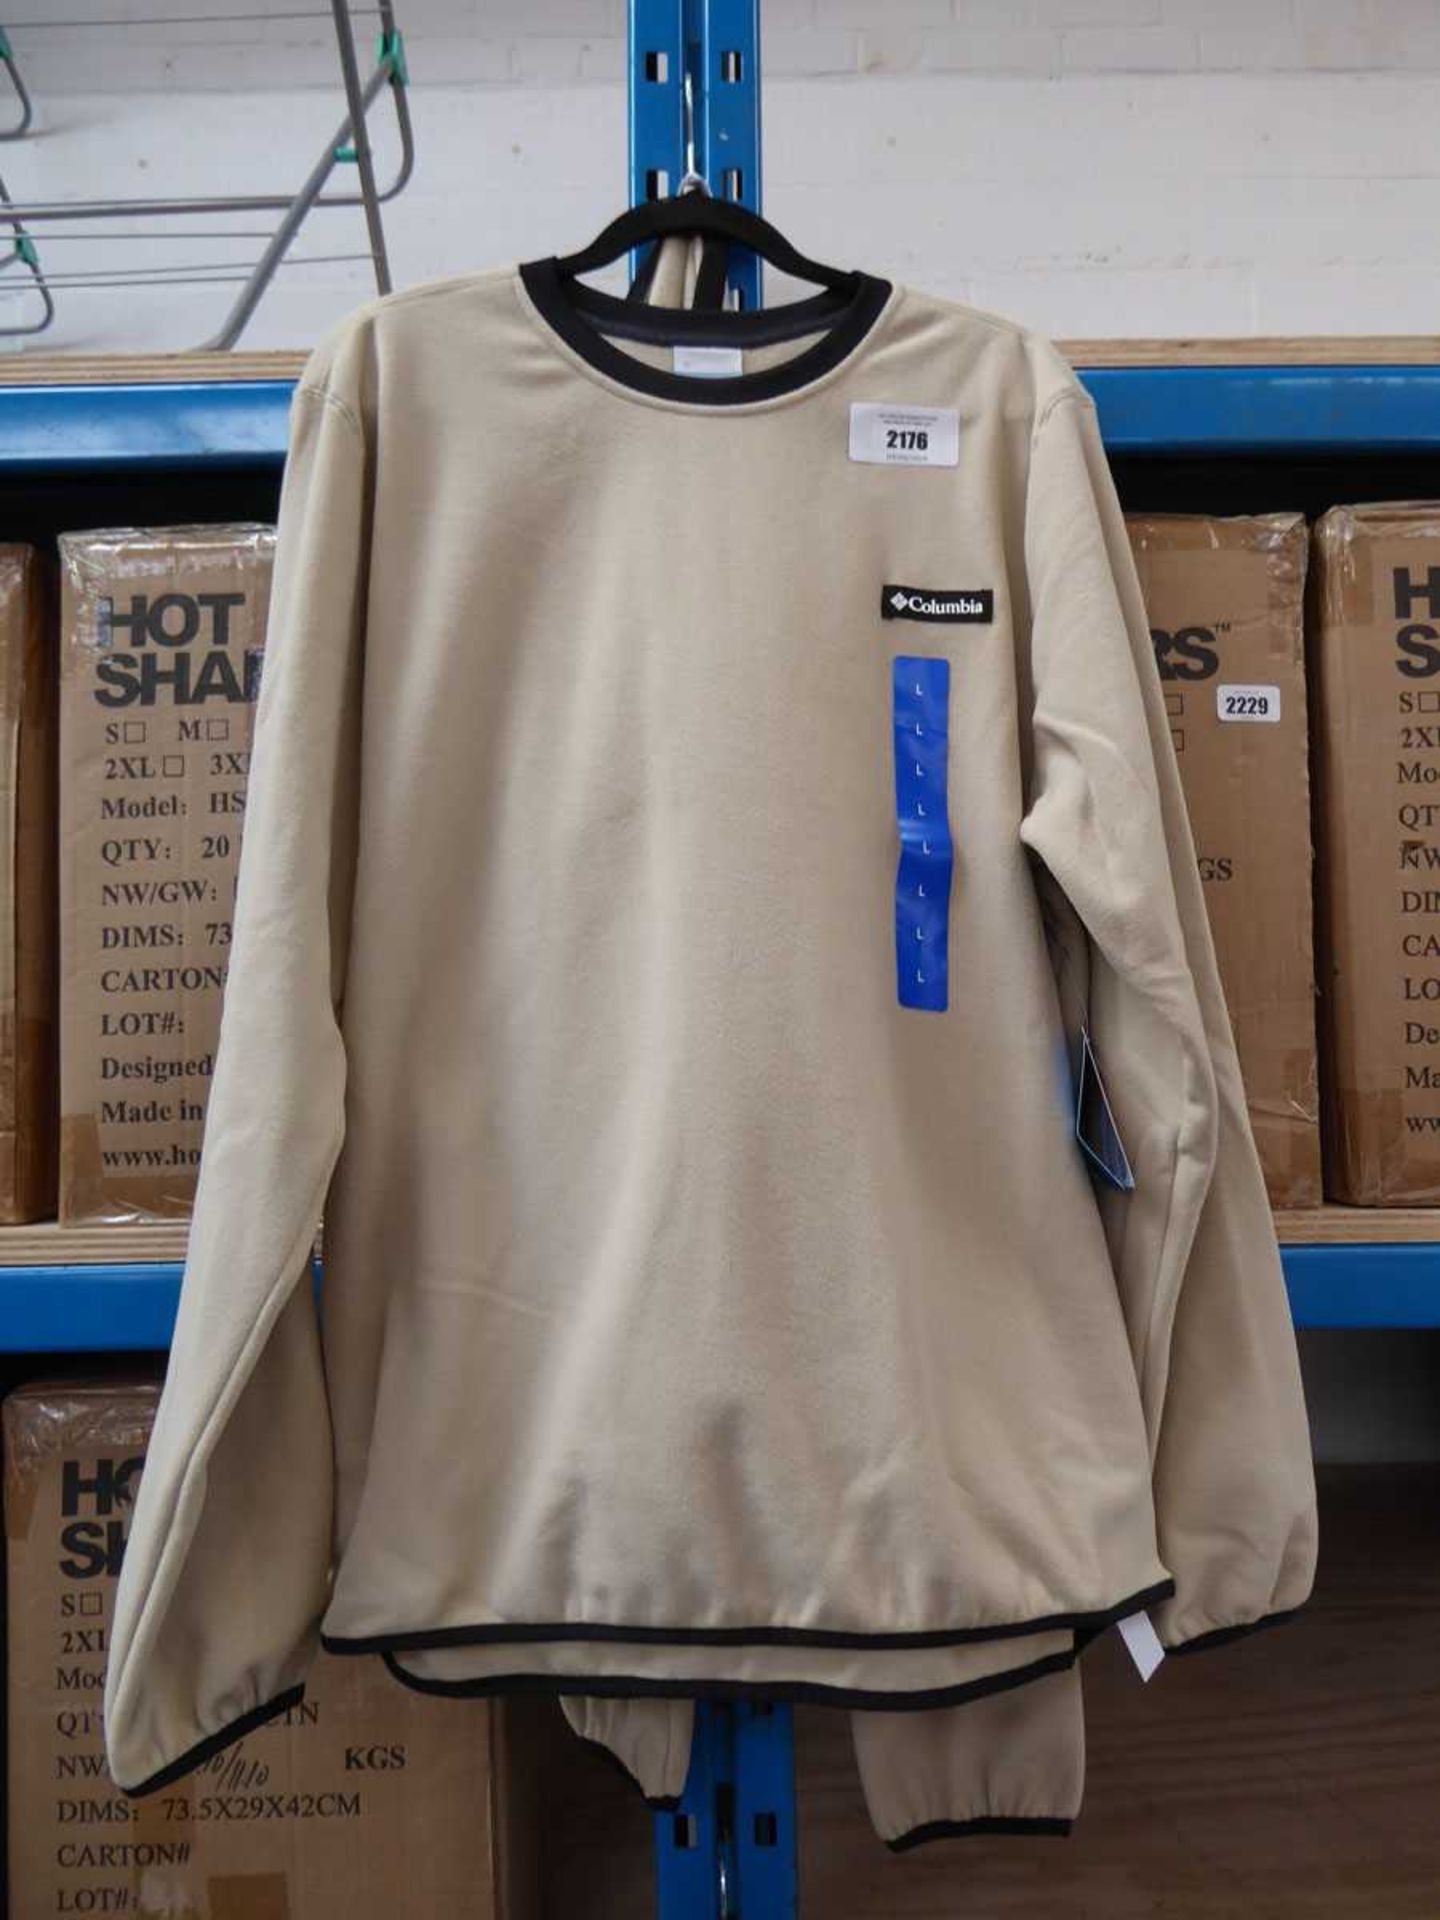 +VAT 2 mens Columbia jumpers in beige and black (size L)